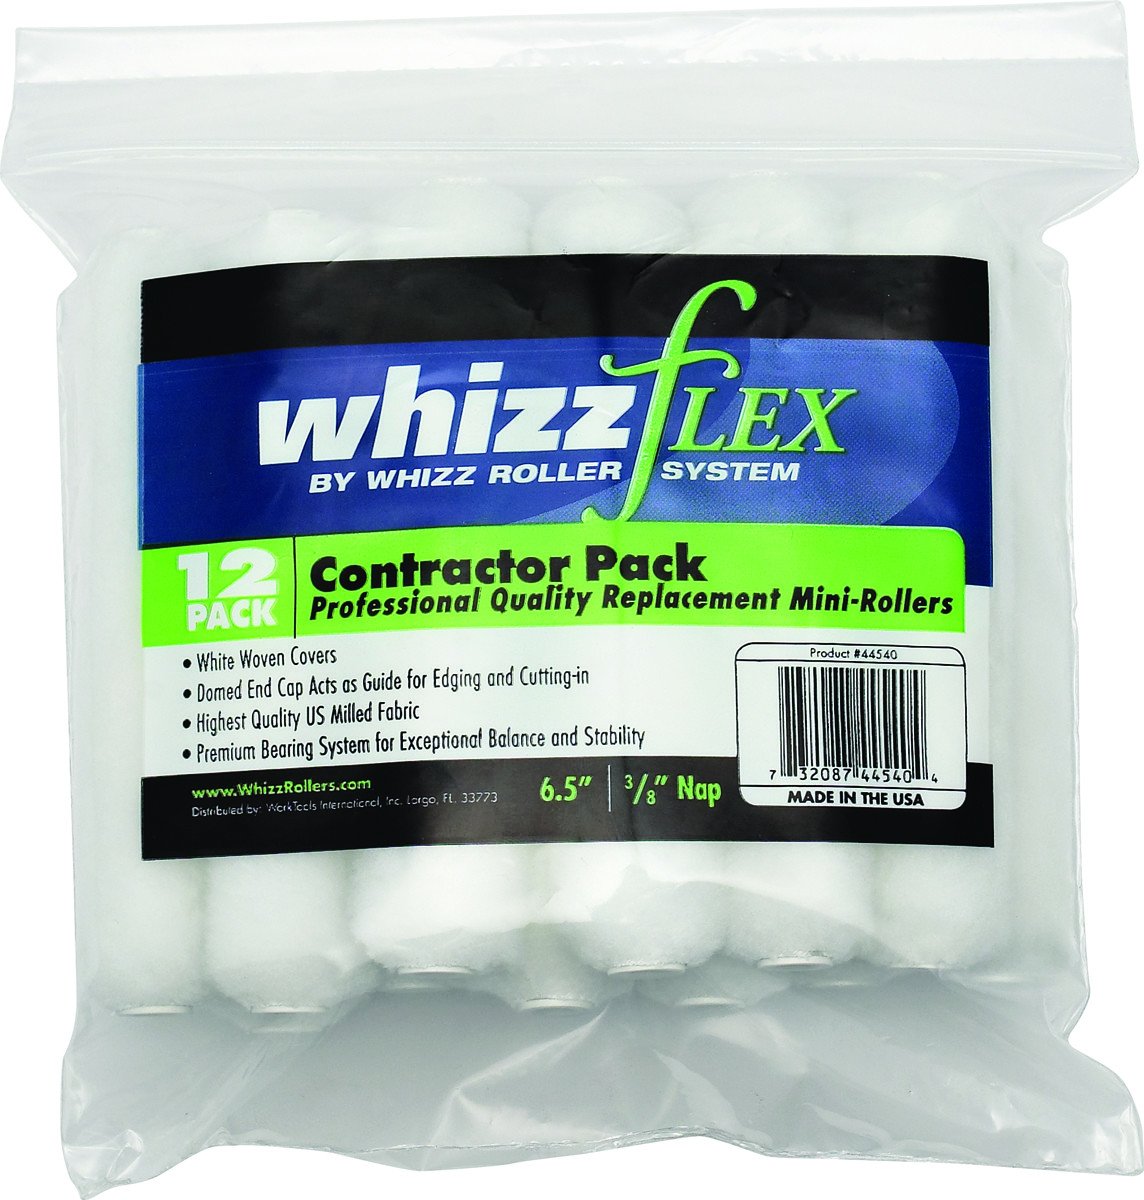 Whizz 6.5" x 3/8" 12 pack of white woven mini rollers, available at Creative Paint in San Francisco, South Bay & East Bay.